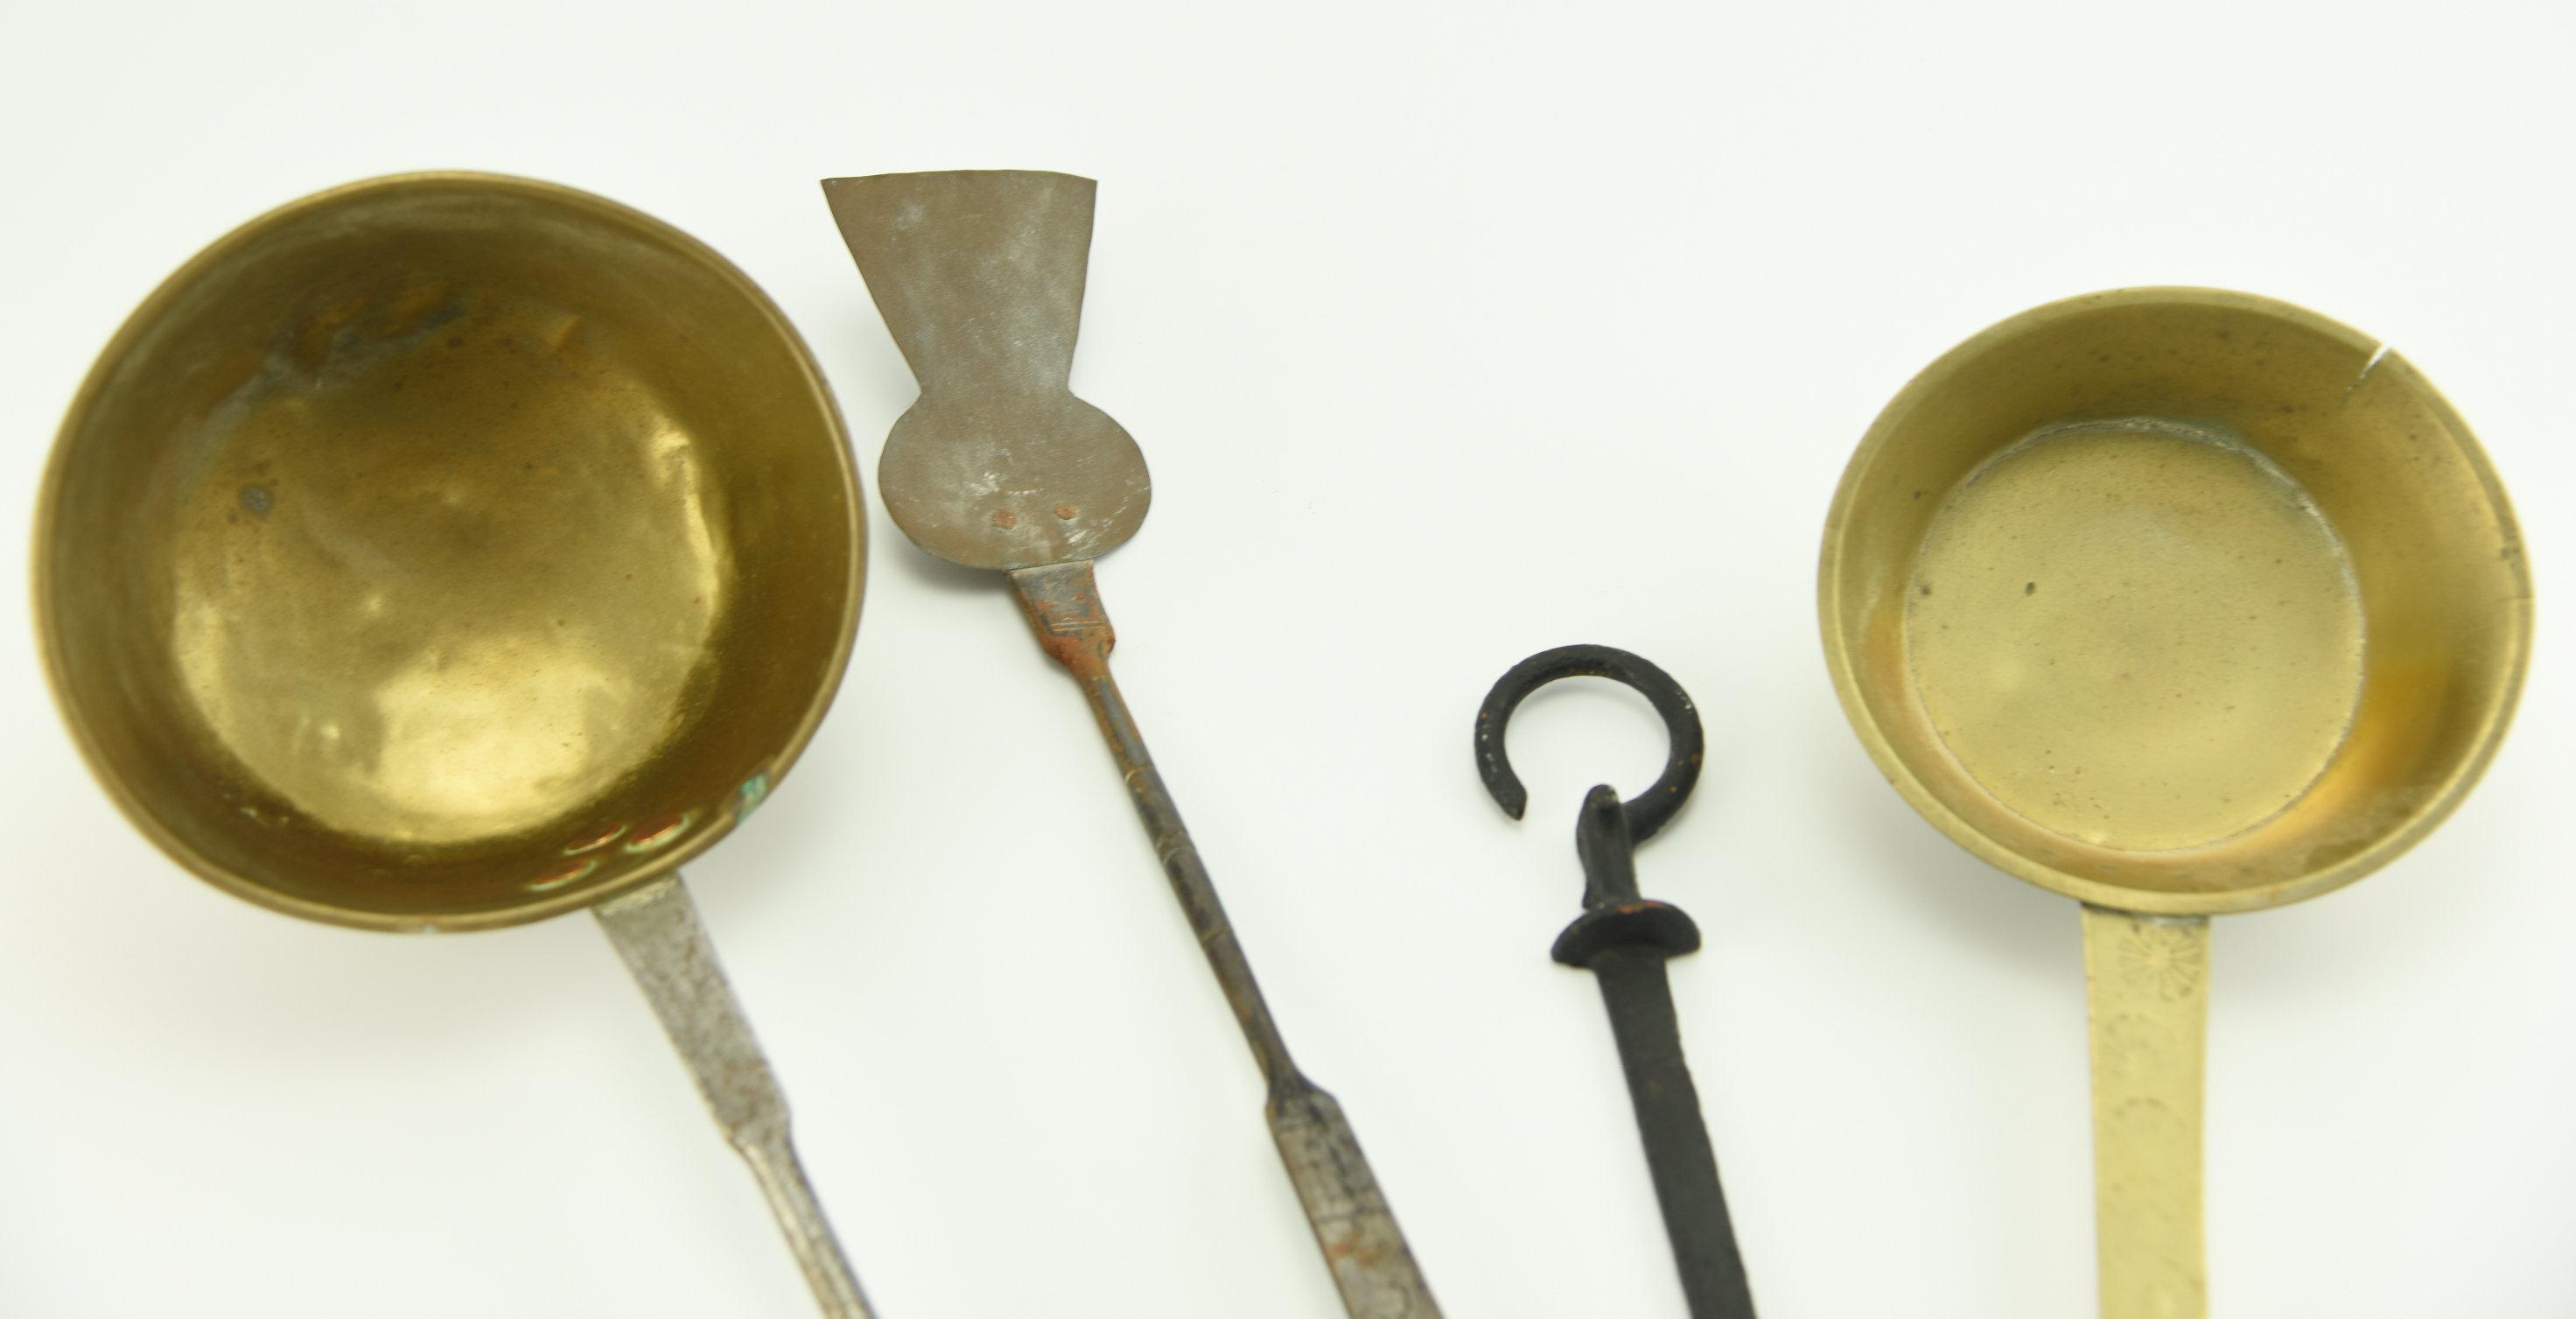 Lot #355 - (2) Early 19th Century brass dipper/ ladles with cast iron handles and one spatula